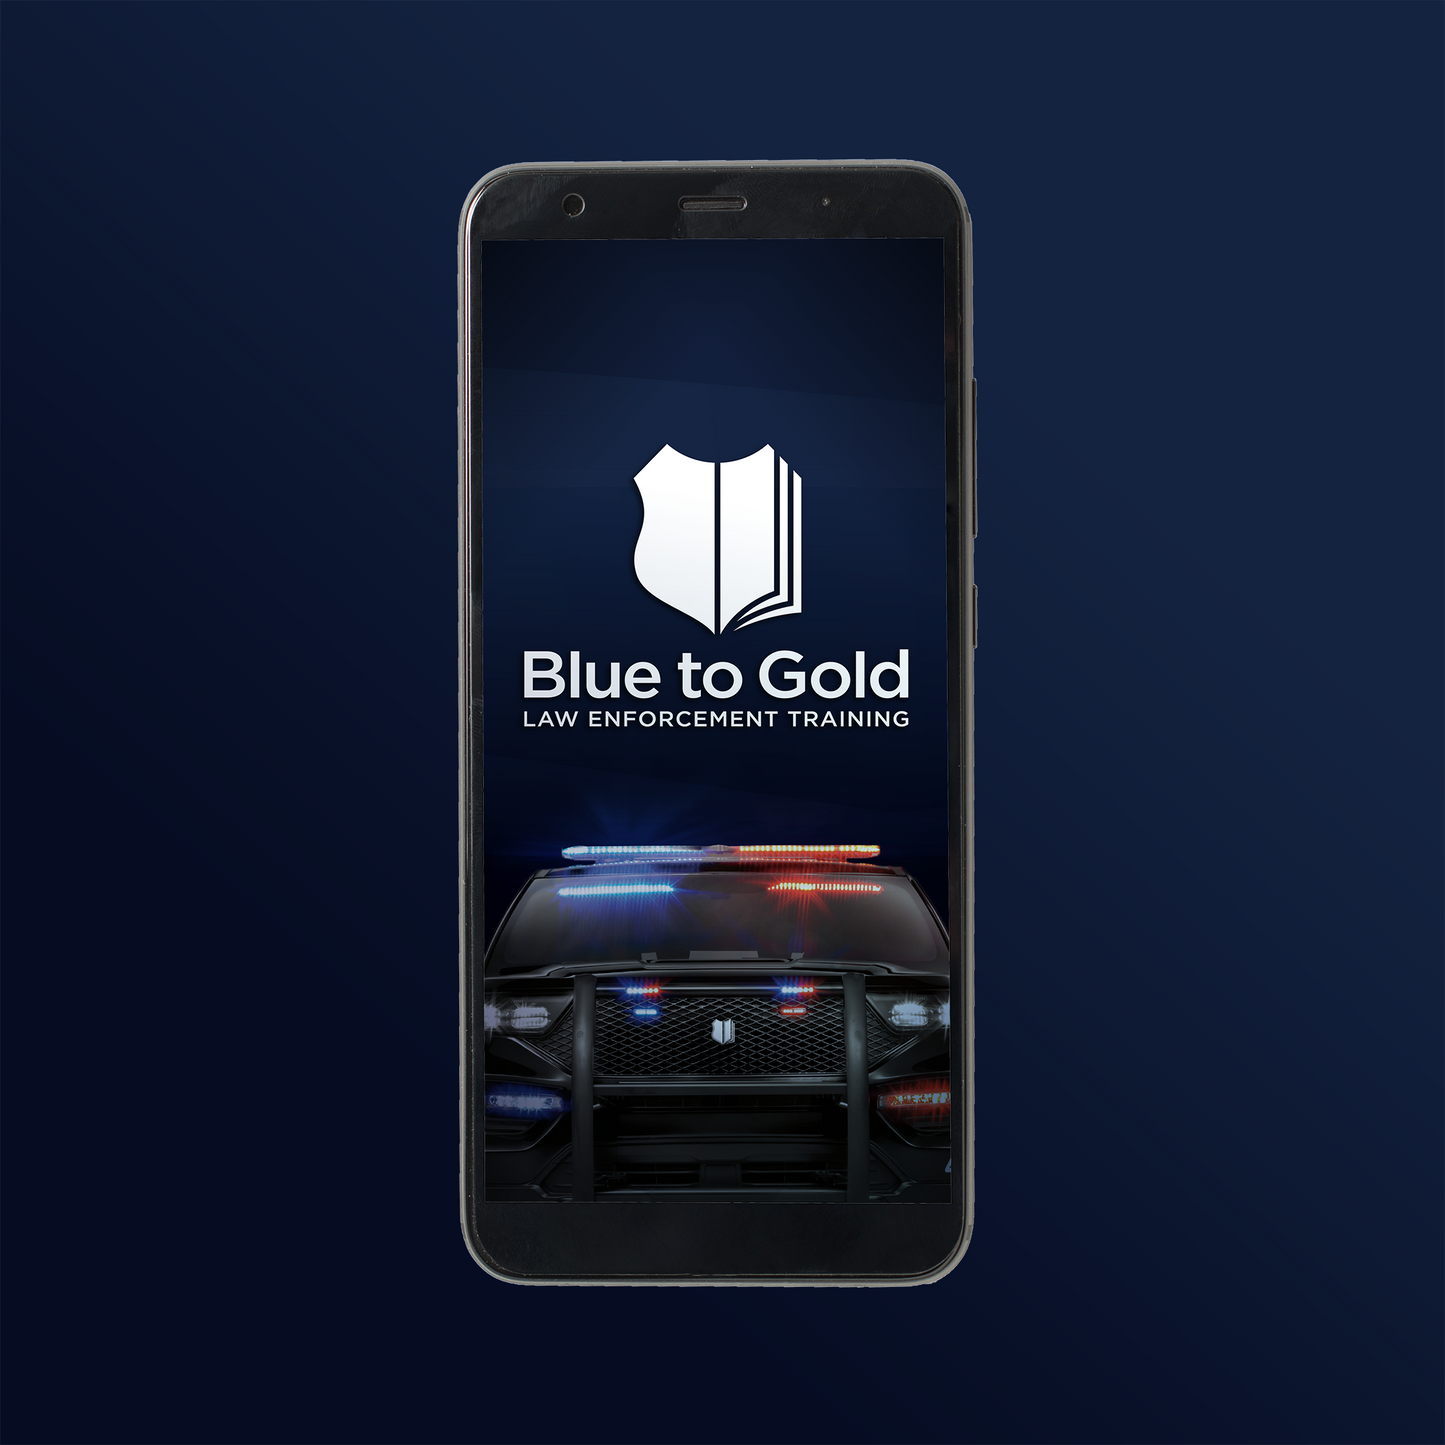 Blue to Gold Phone Wallpaper